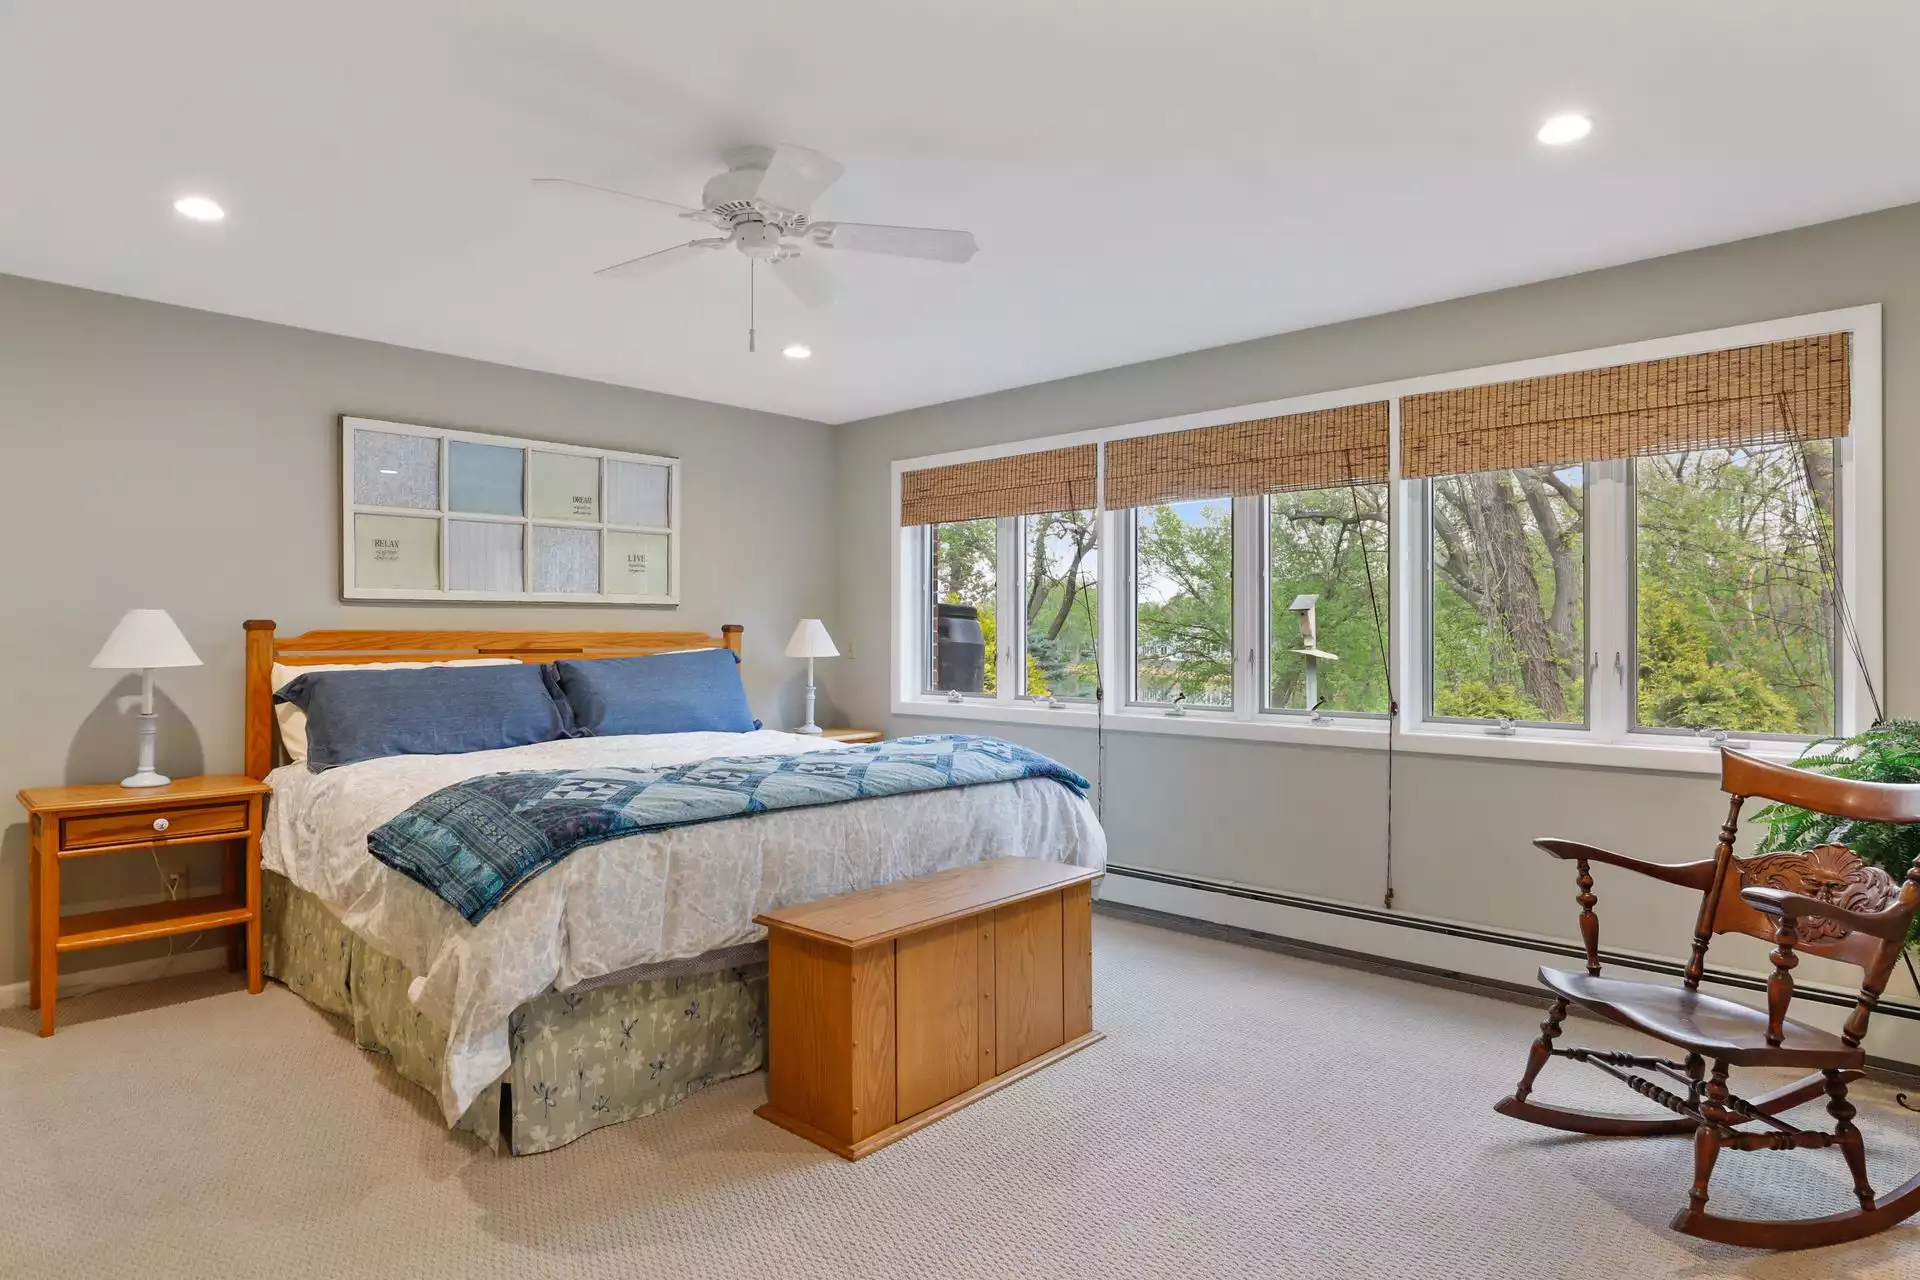 Maplewood Home For Sale Bedroom